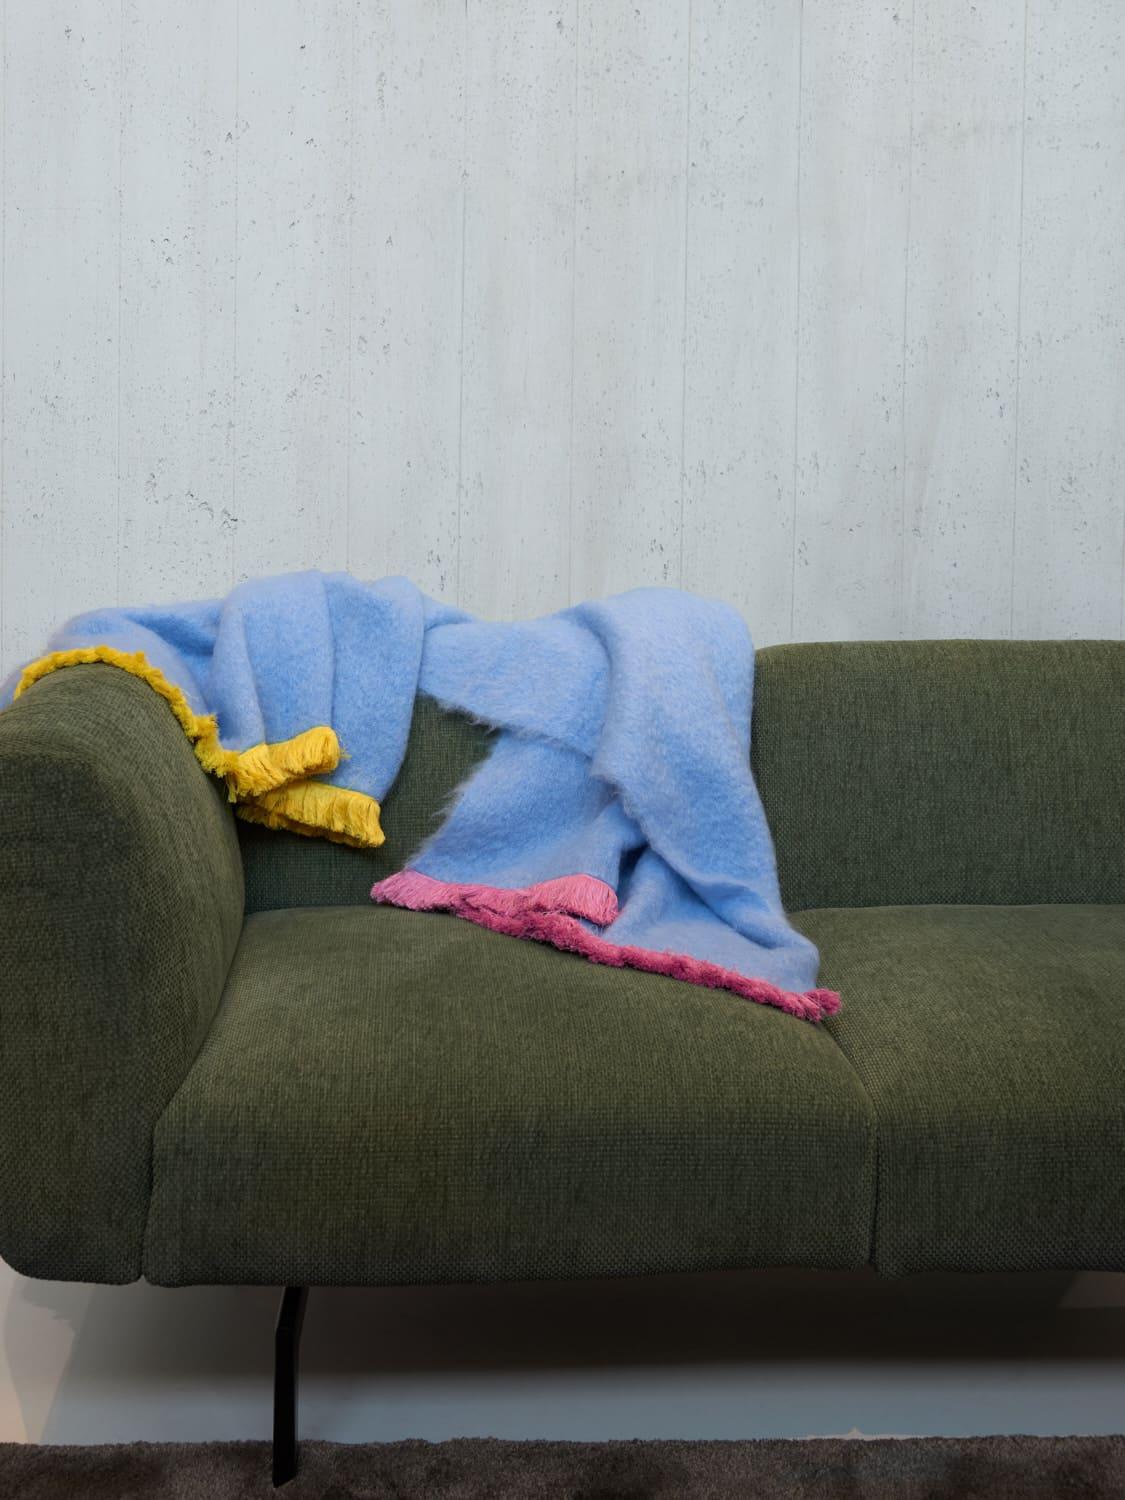 Pompallier, a sweet blue throw blanket made of the finest New Zealand mohair. Characterized with a pink and yellow fringe border completely embroidered by hand. Nothing as personal as your own interior, the colors can be customized on